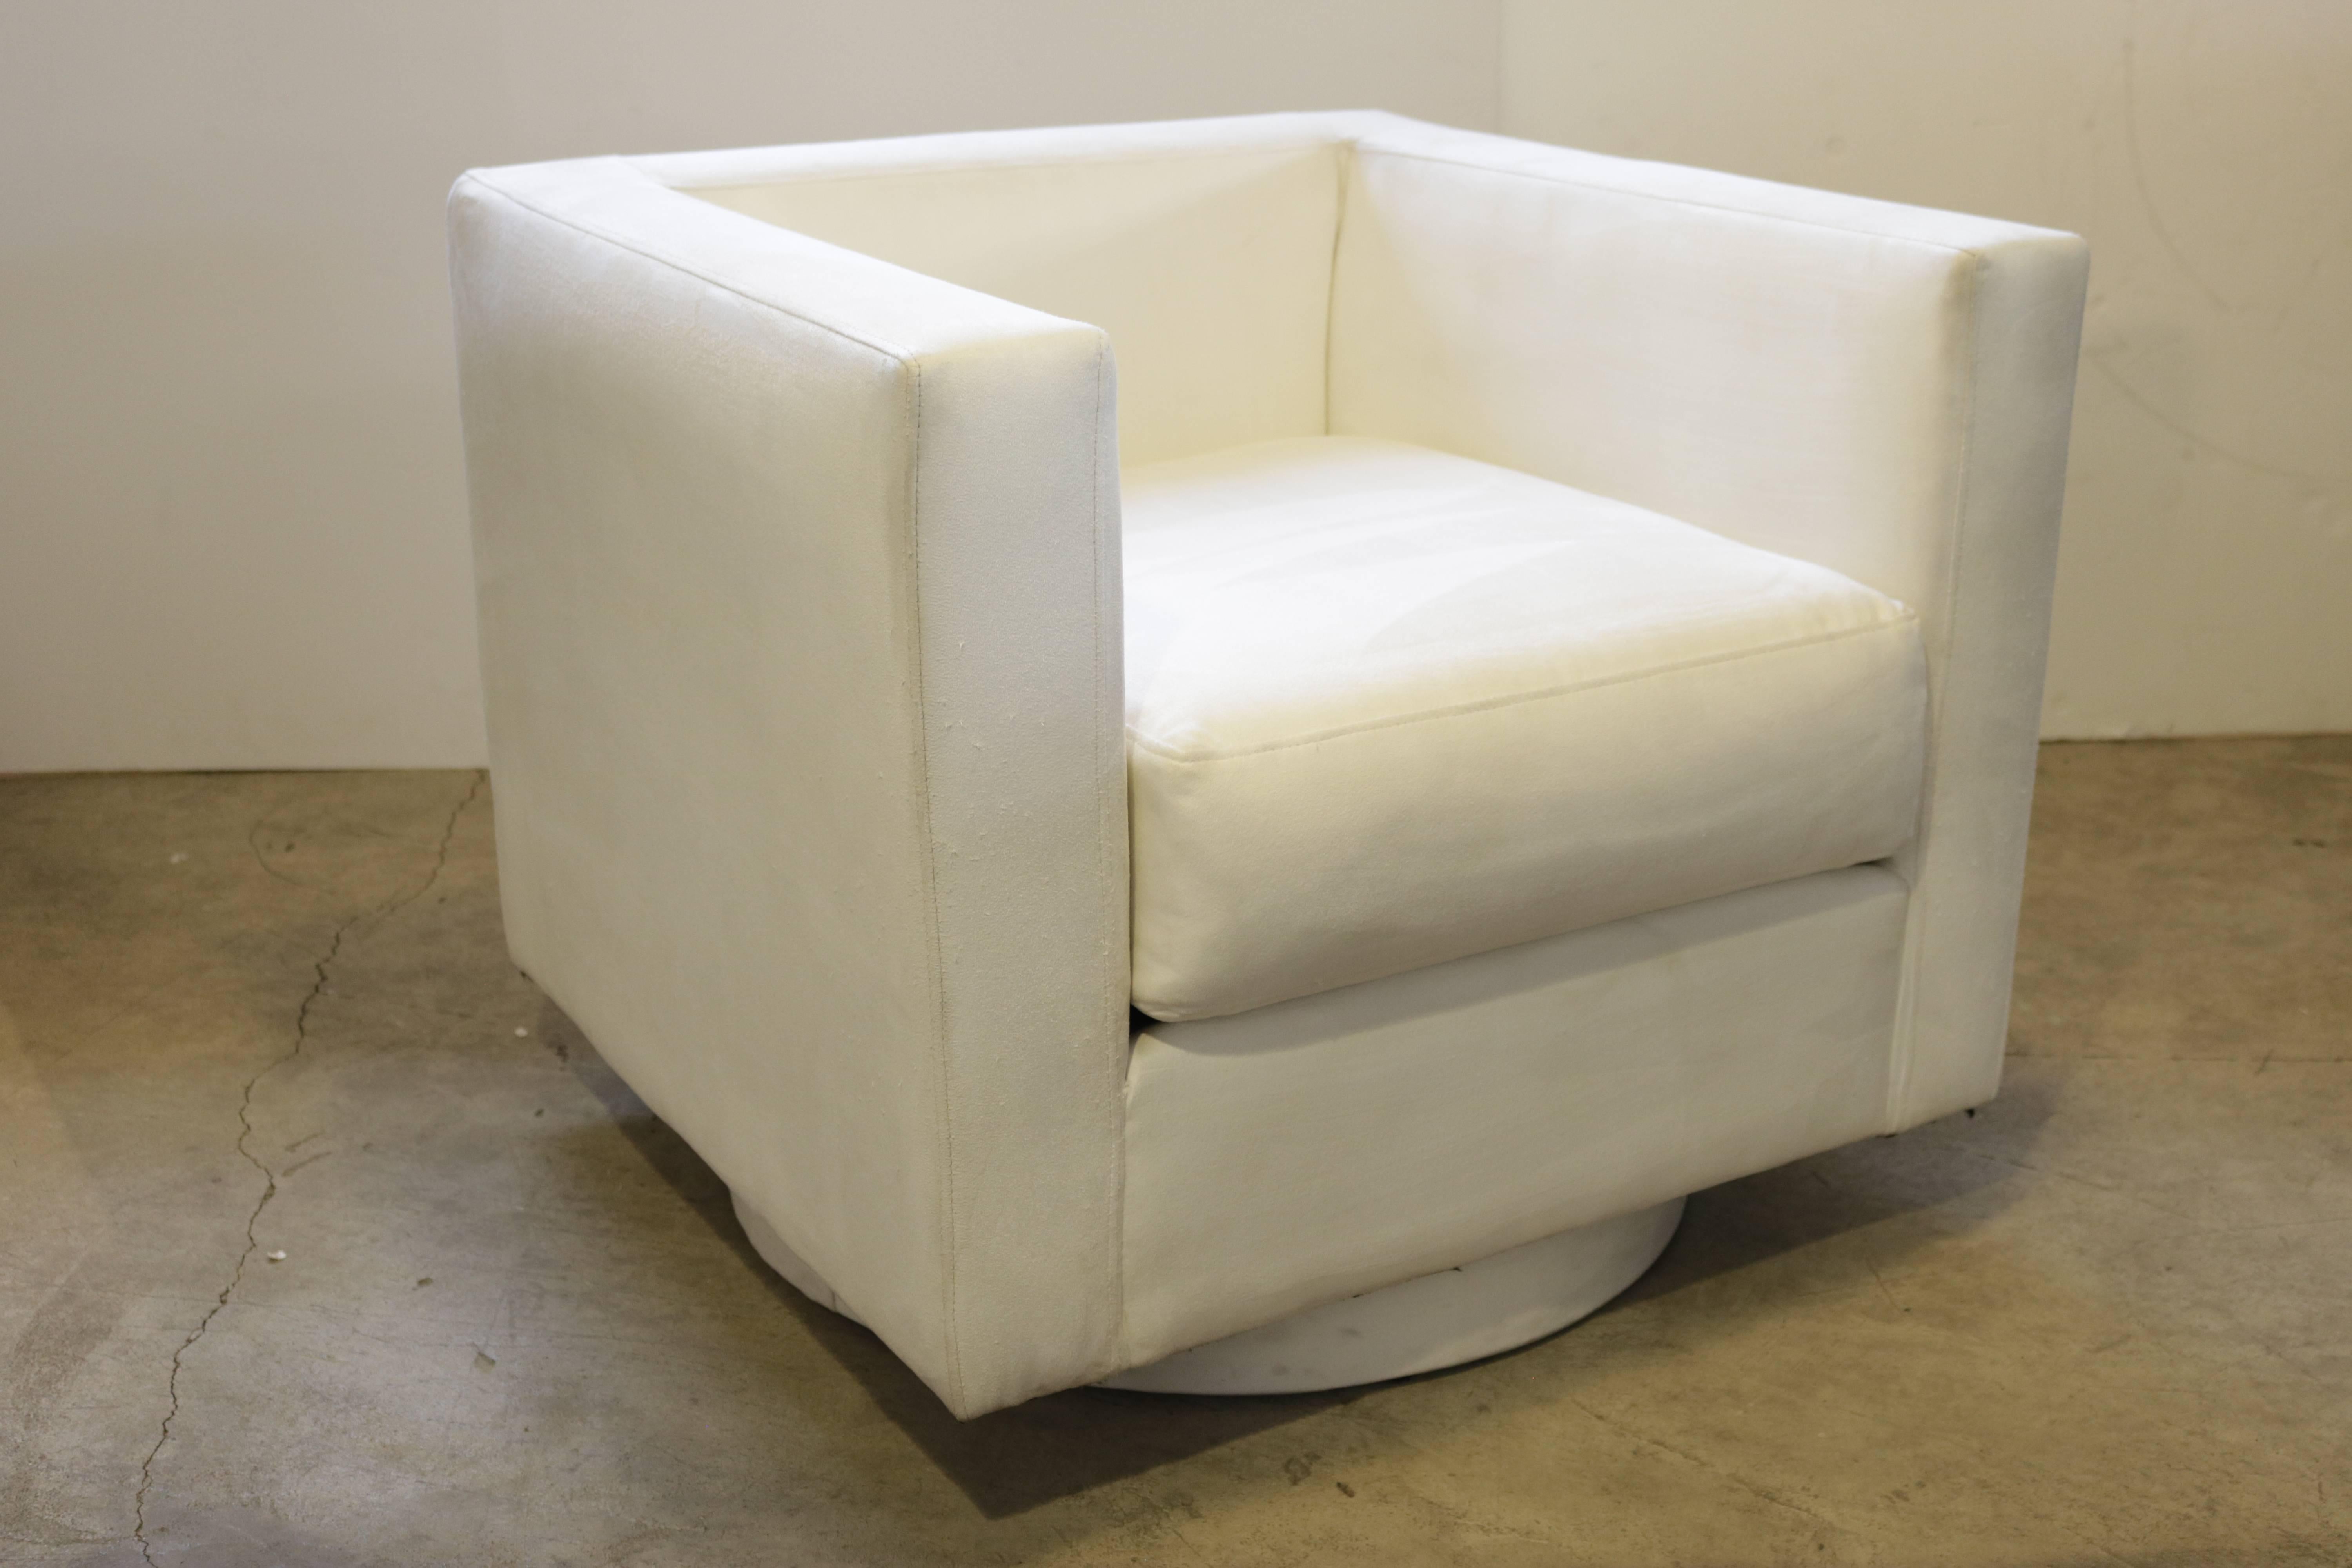 Upholstered, tuxedo style chair on a swivel base. Tuxedo arms are a sleek, streamlined style where the arms are the same height as the back of the chair. Seat depth is 25.0". We suggest that the buyer have the chair recovered because the back